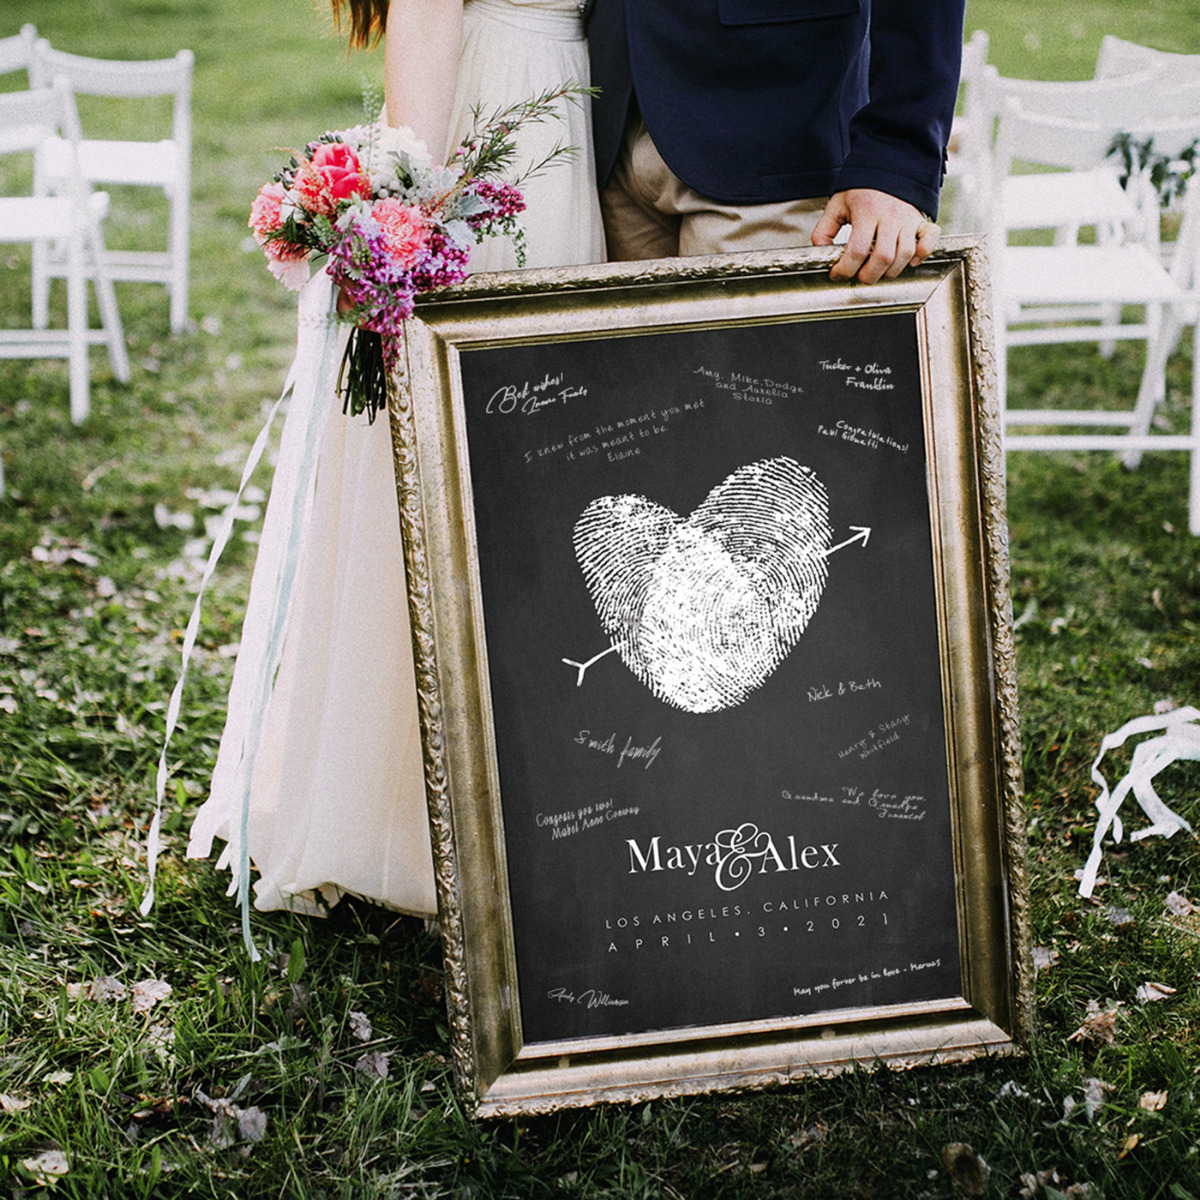 Celebrate Your Wedding Guests with This Unique Guest Book Keepsake